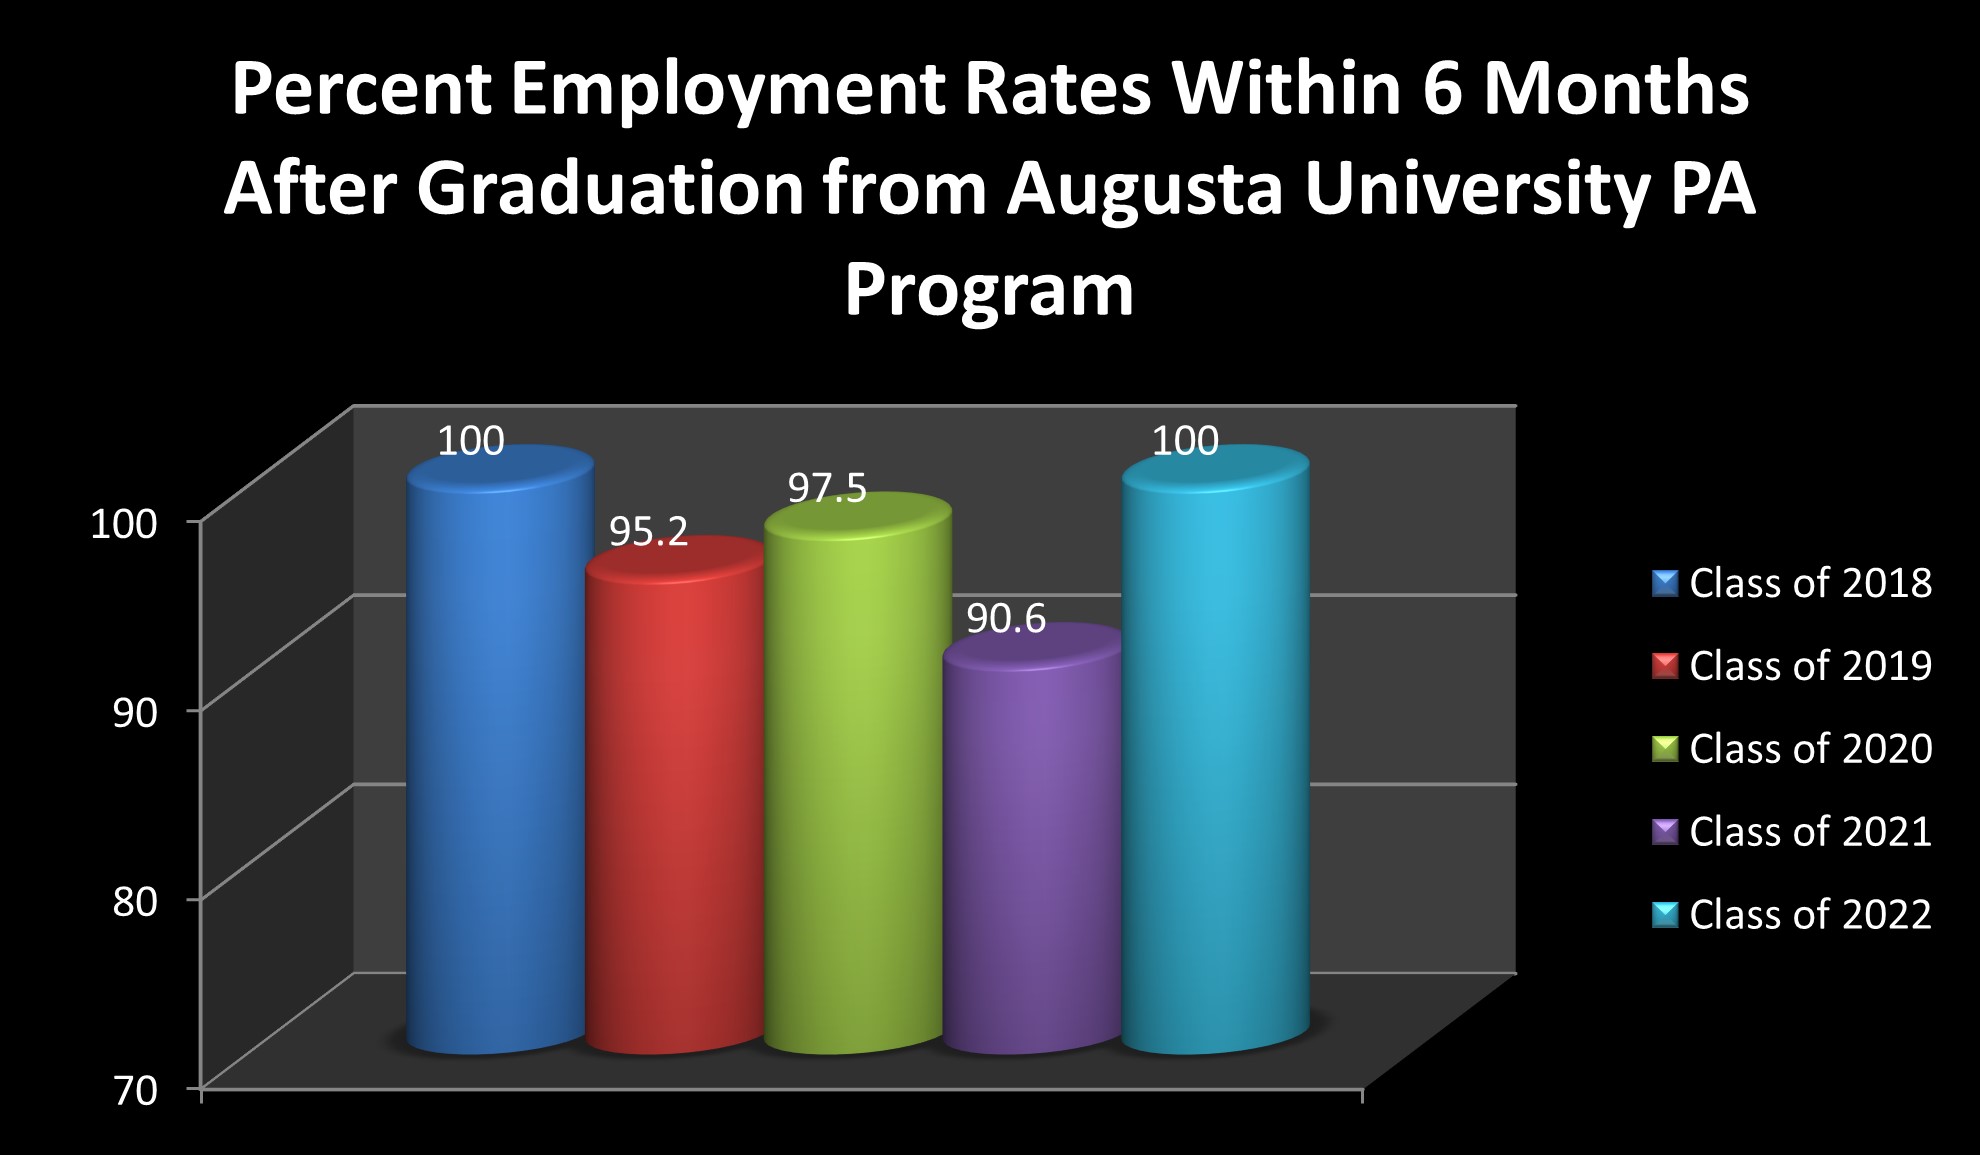 Percent Employment Rates Within 6 Months After Graduation